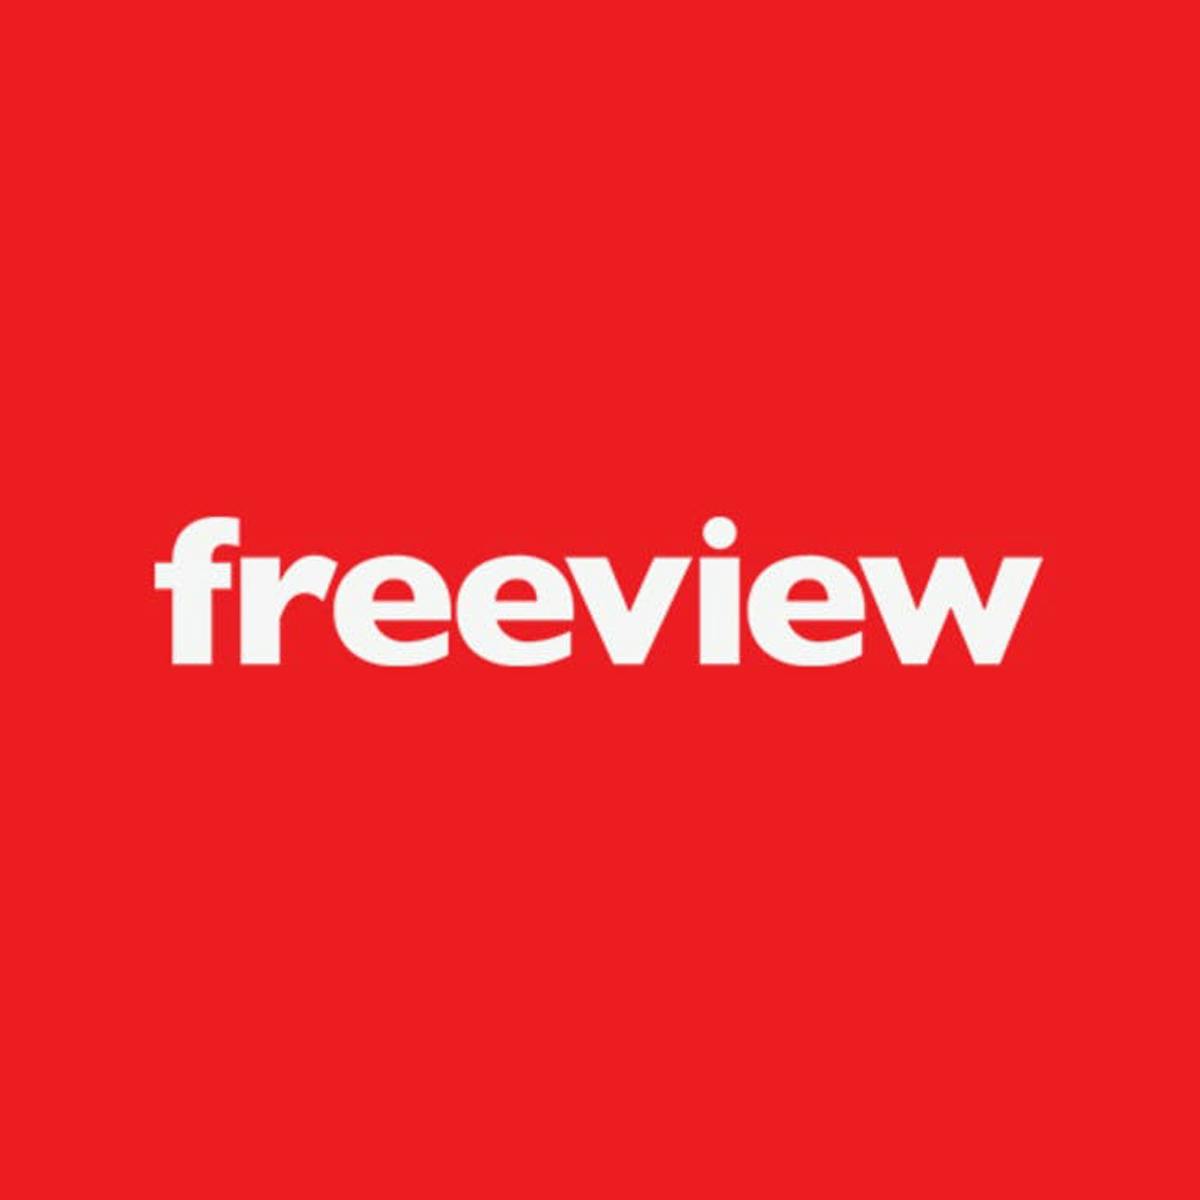 Home Freeview Australia Free To Air Tv Guide On Demand Guide And More